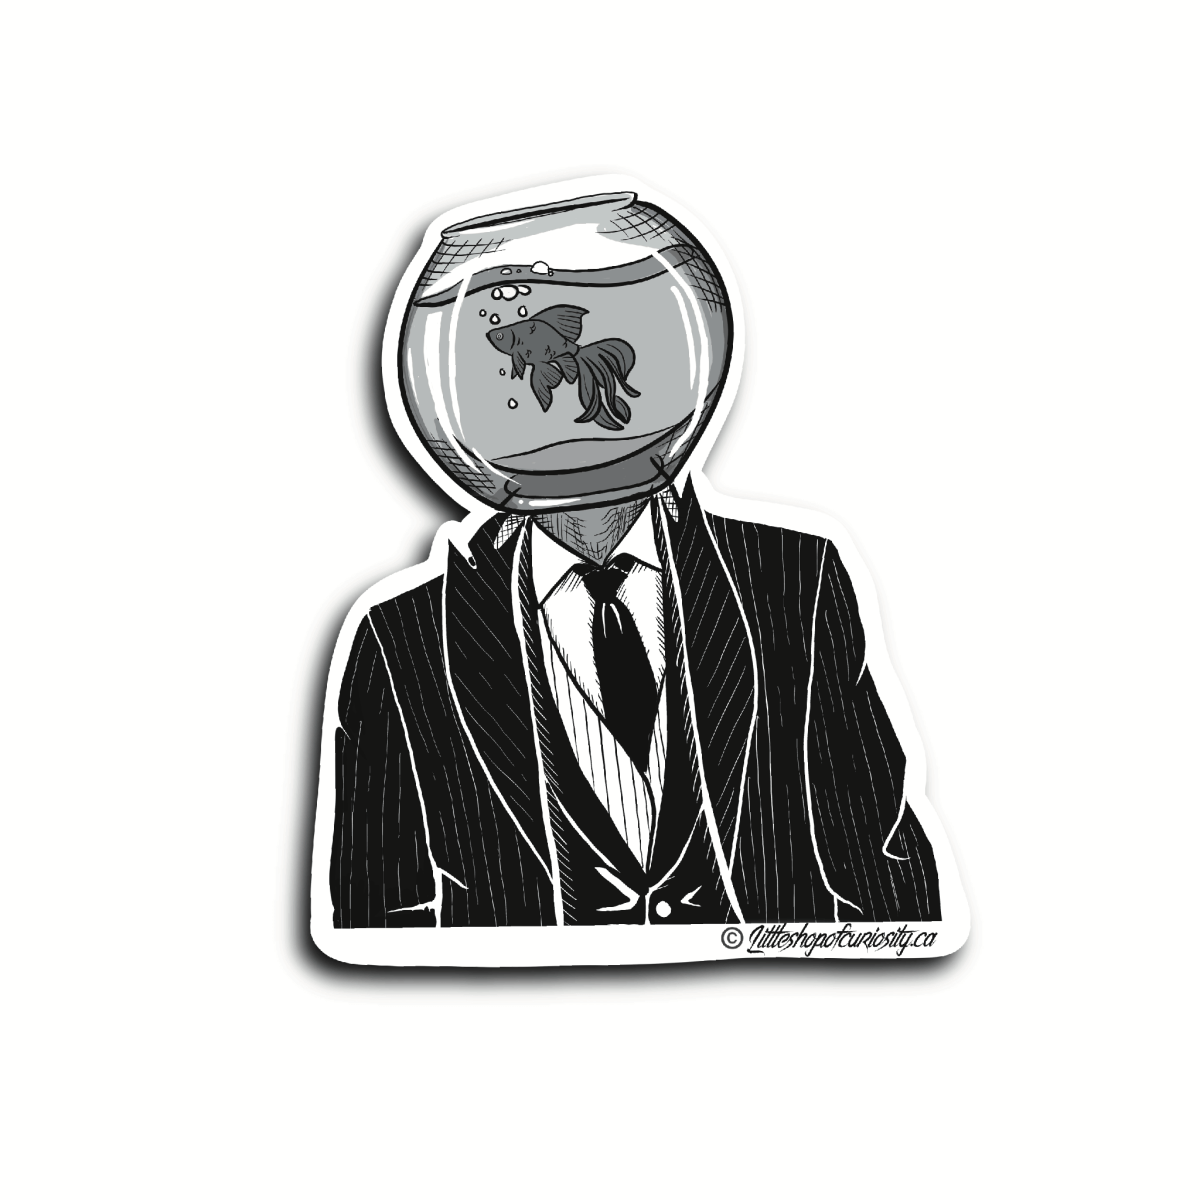 Get Out Of My Fishbowl Sticker - Black & White Sticker - Little Shop of Curiosity